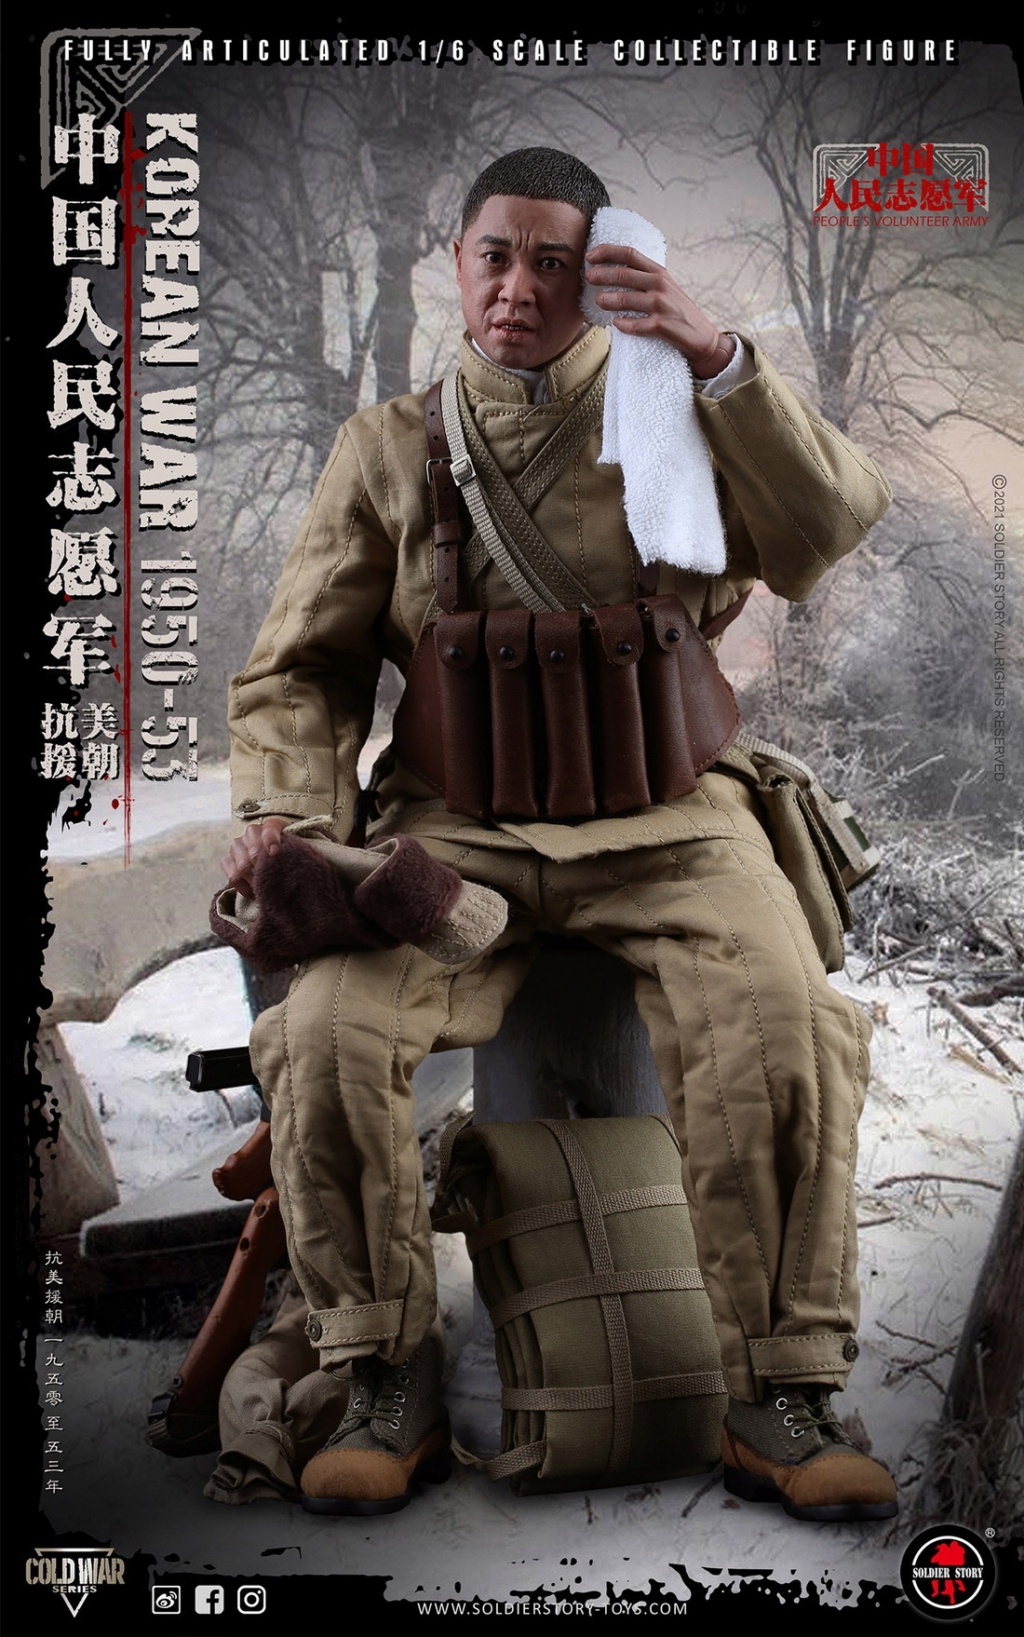 Soldierstory - NEW PRODUCT: SOLDIER STORY: 1/6 Chinese People’s Volunteers 1950-53 Collectible Action Figure (#SS-124) 10e63f10